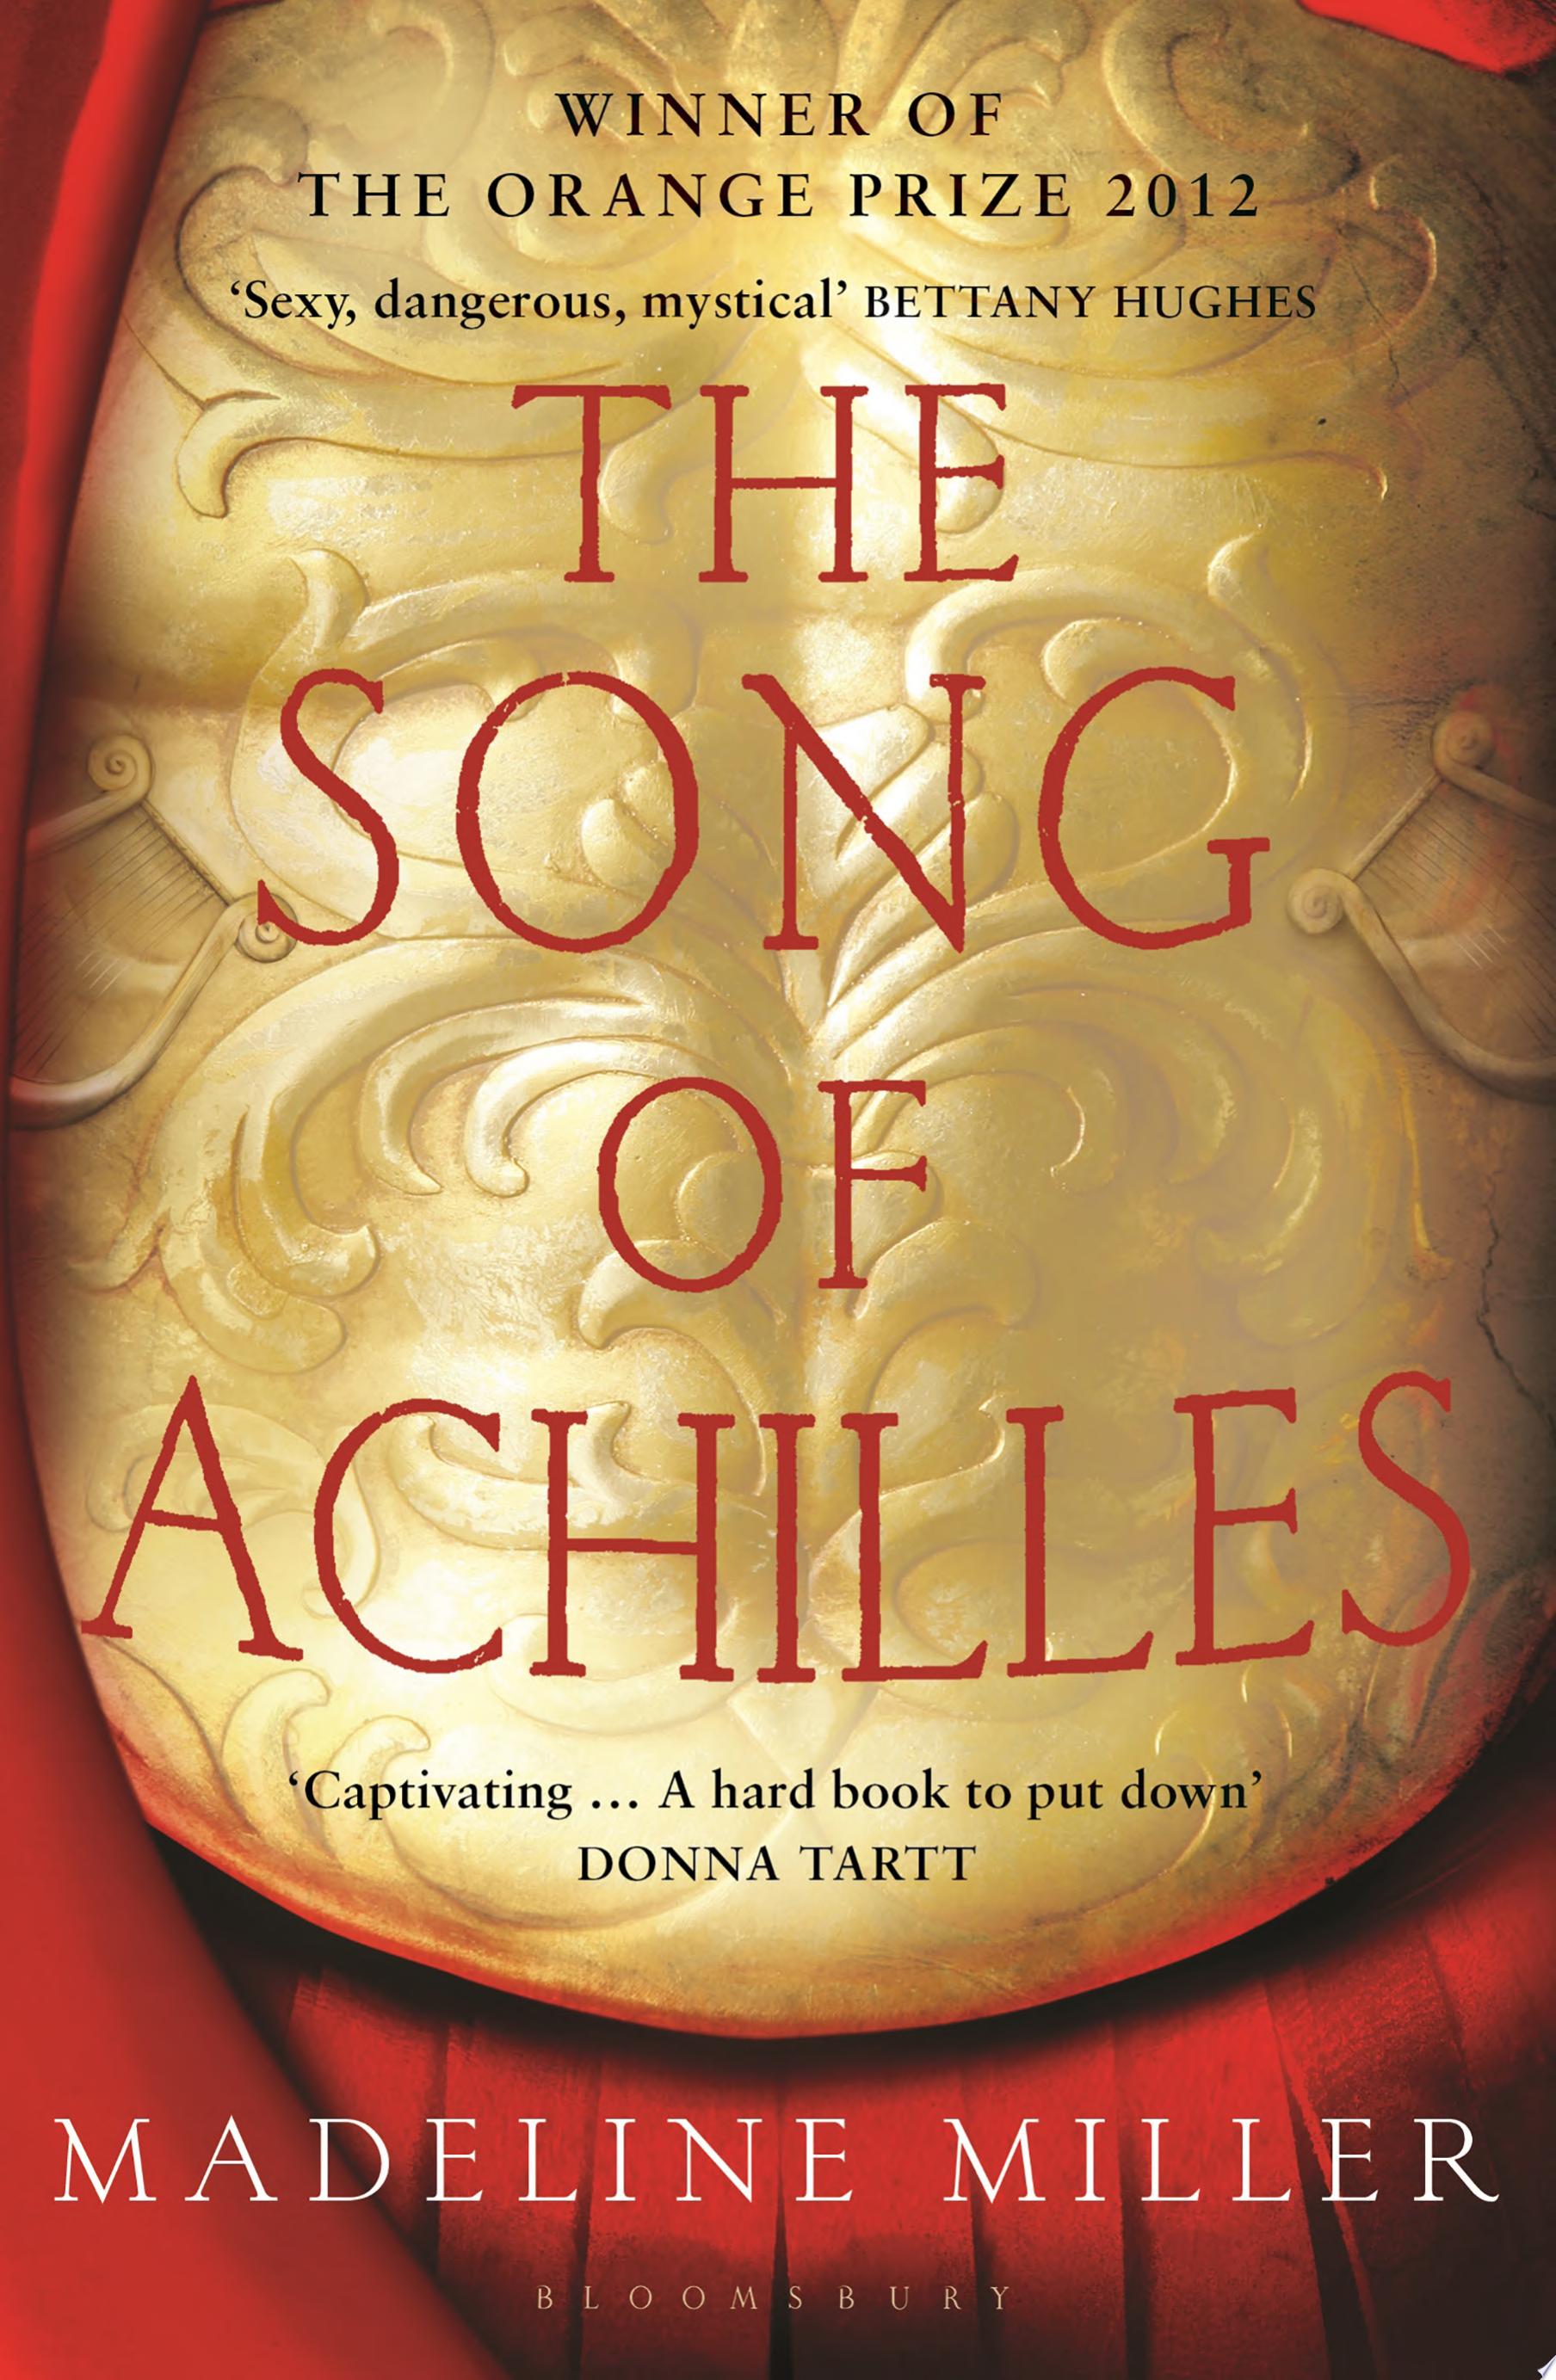 Image for "The Song of Achilles"